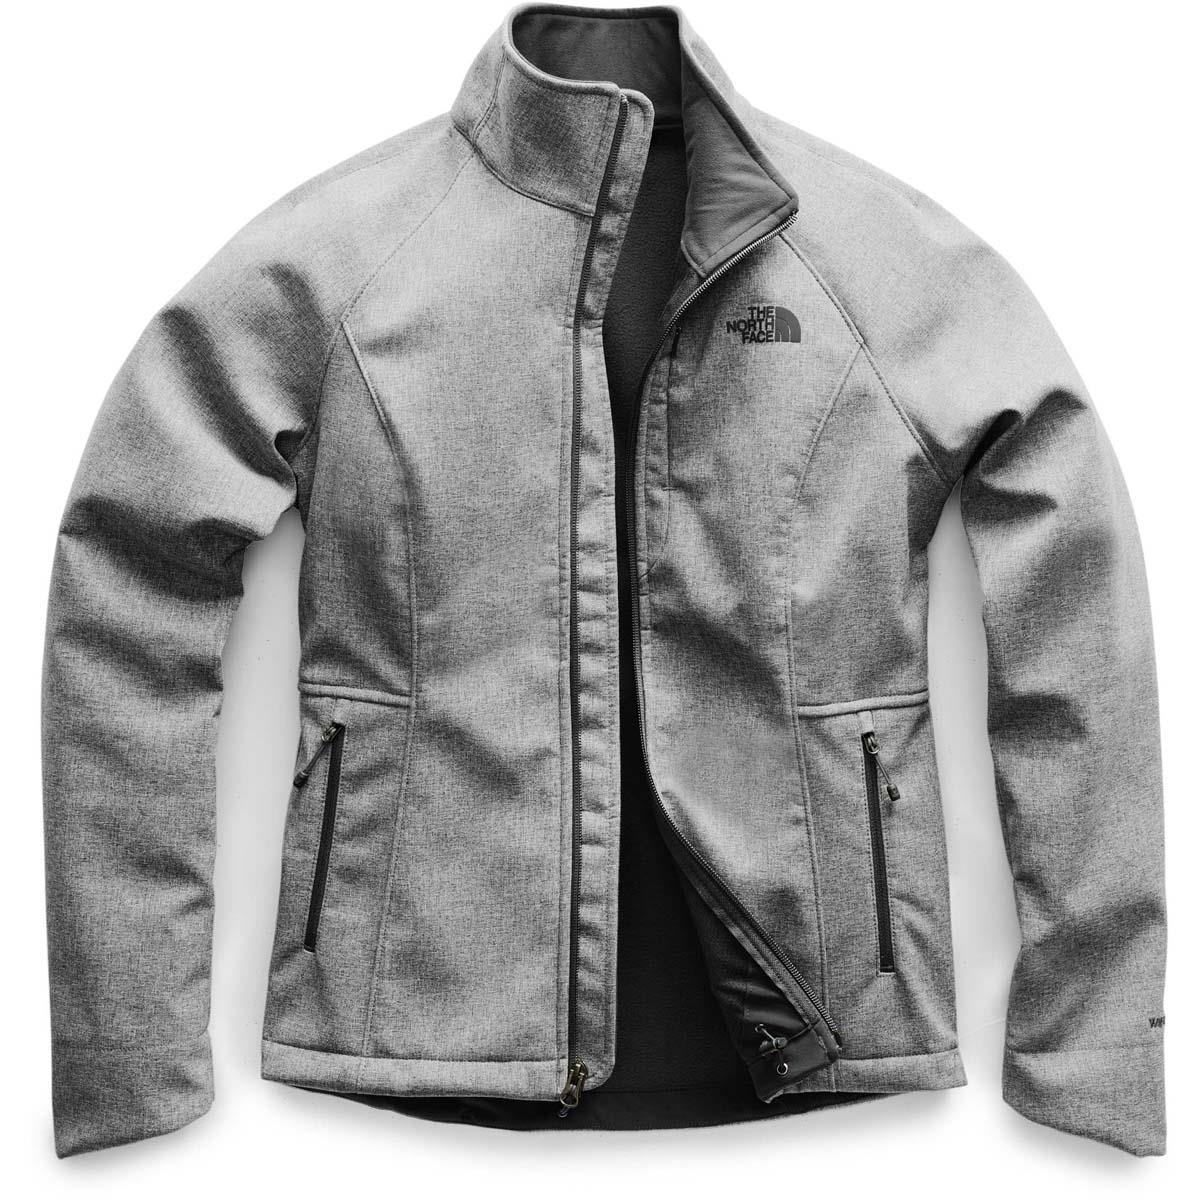 the north face apex bionic 2 jacket